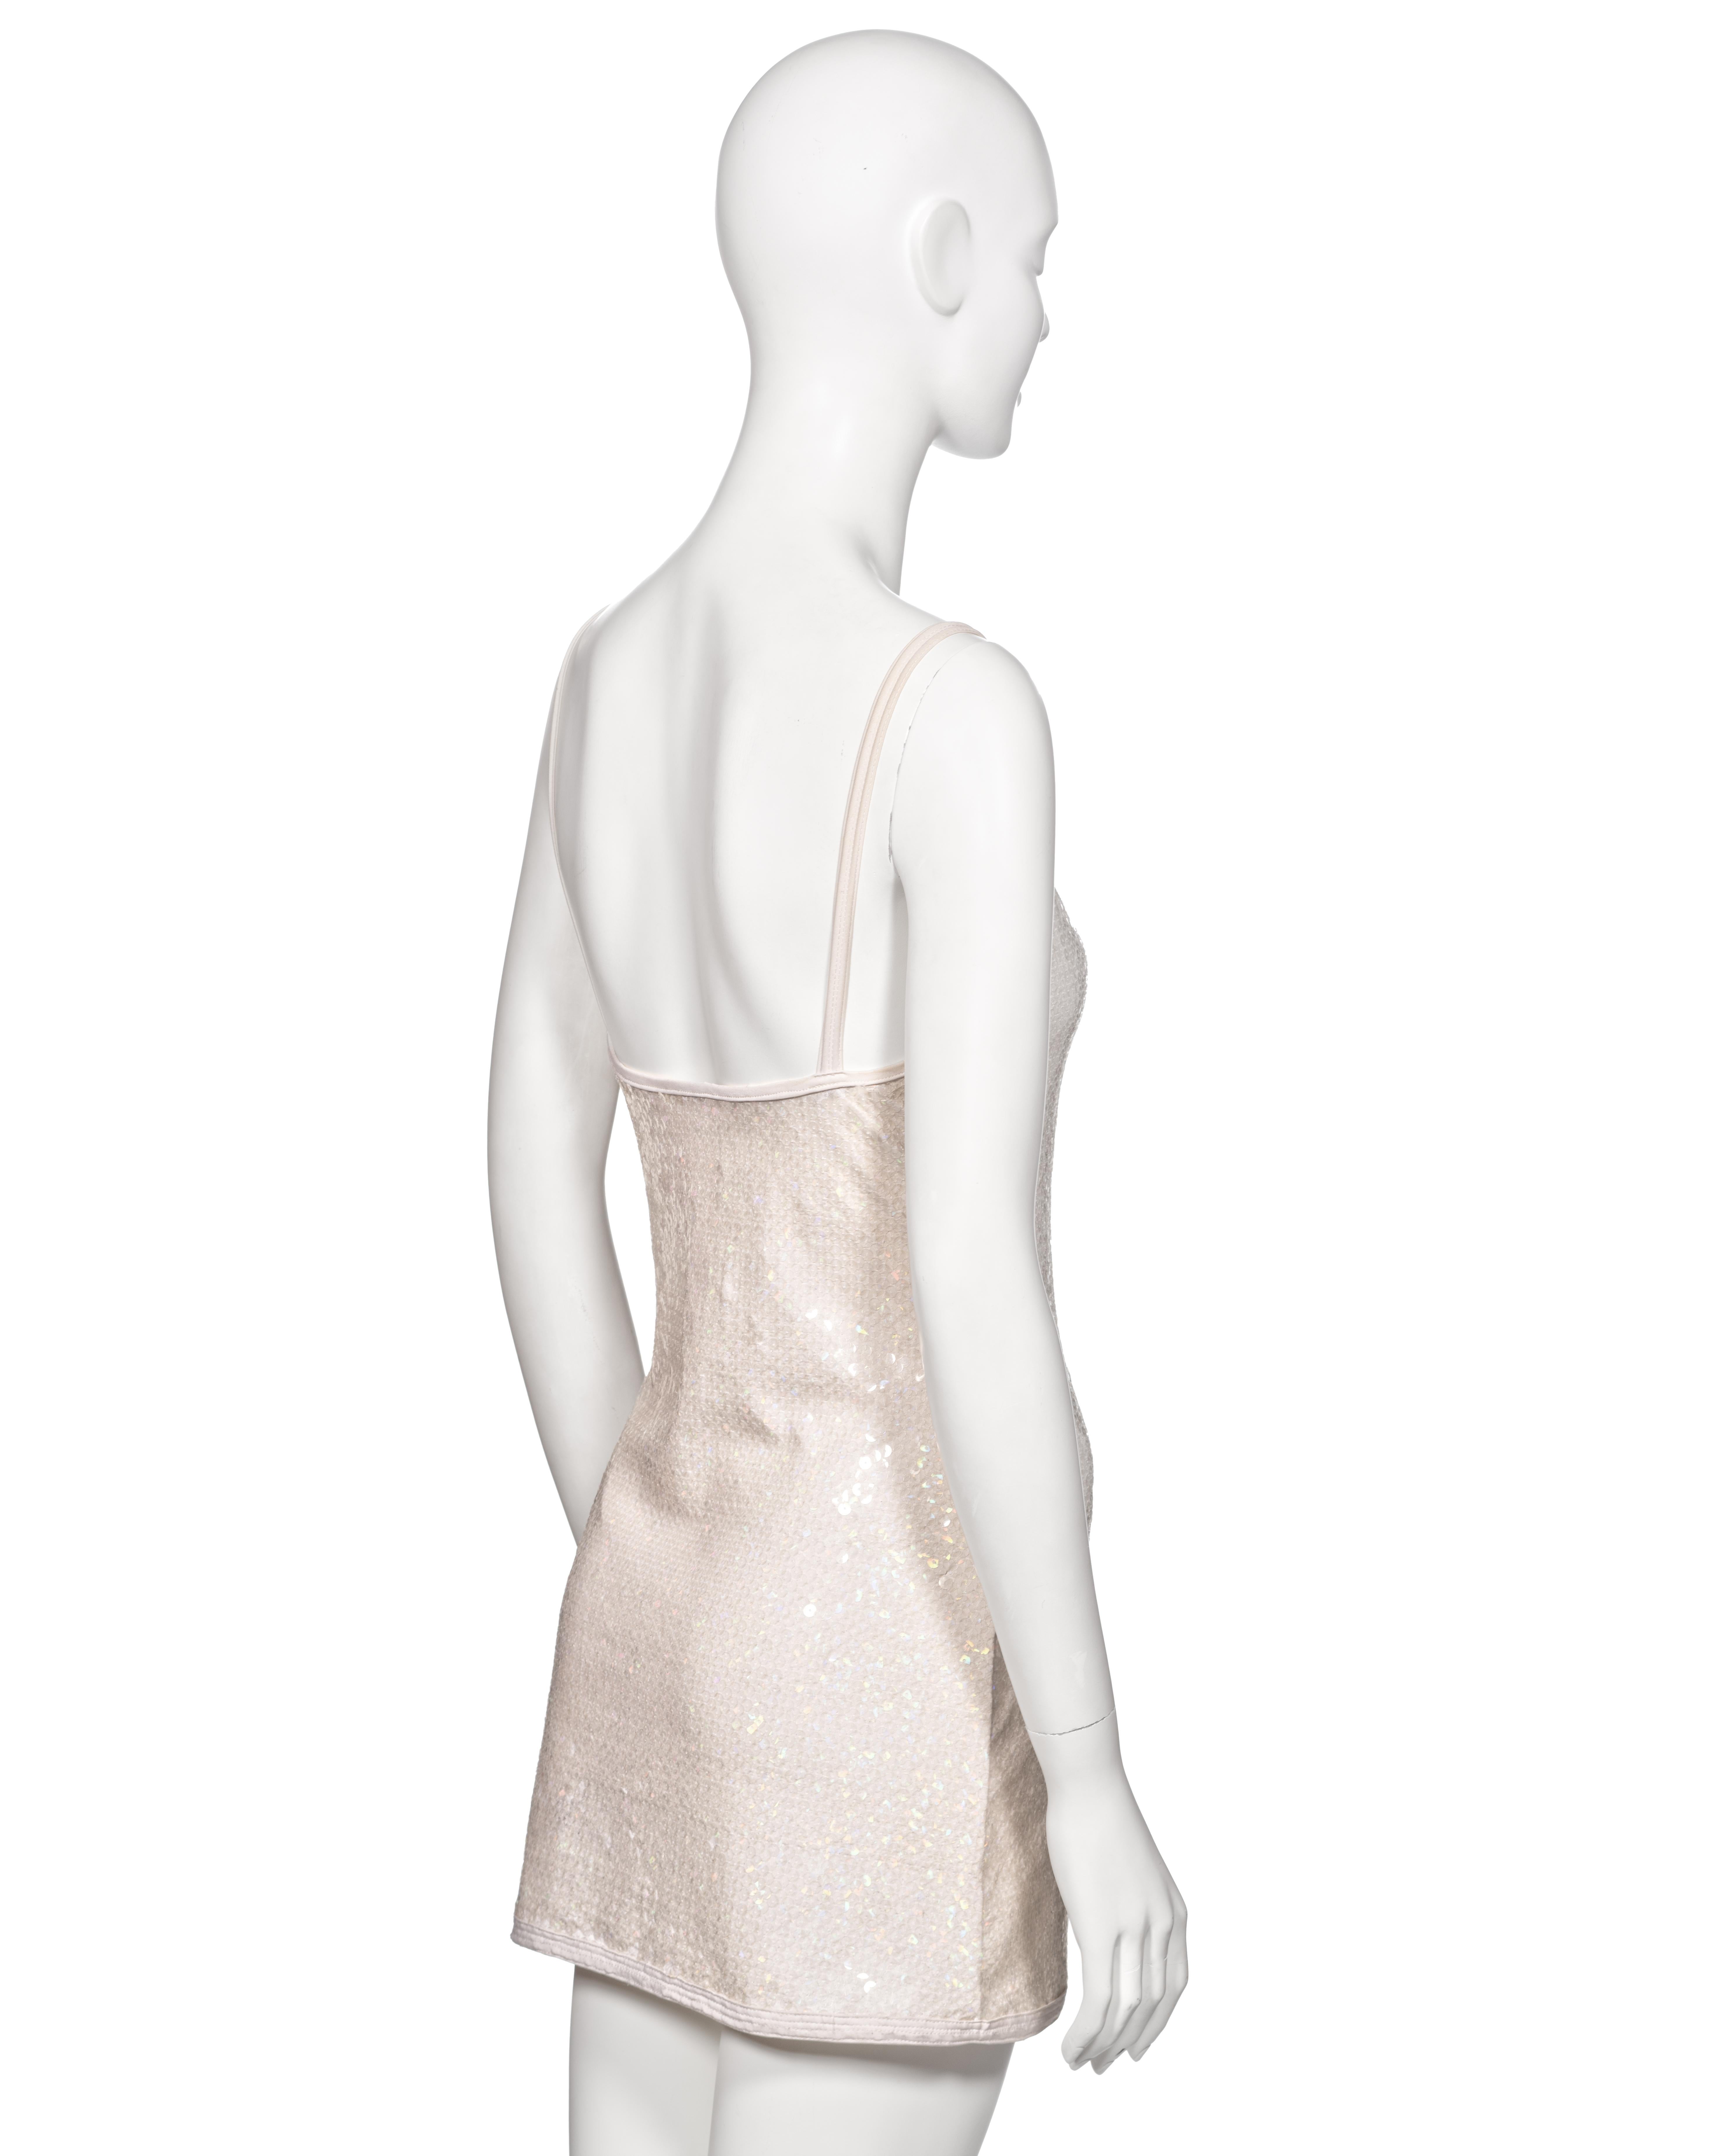 Chanel by Karl Lagerfeld White Iridescent Sequin Mini Dress, ss 2005 3